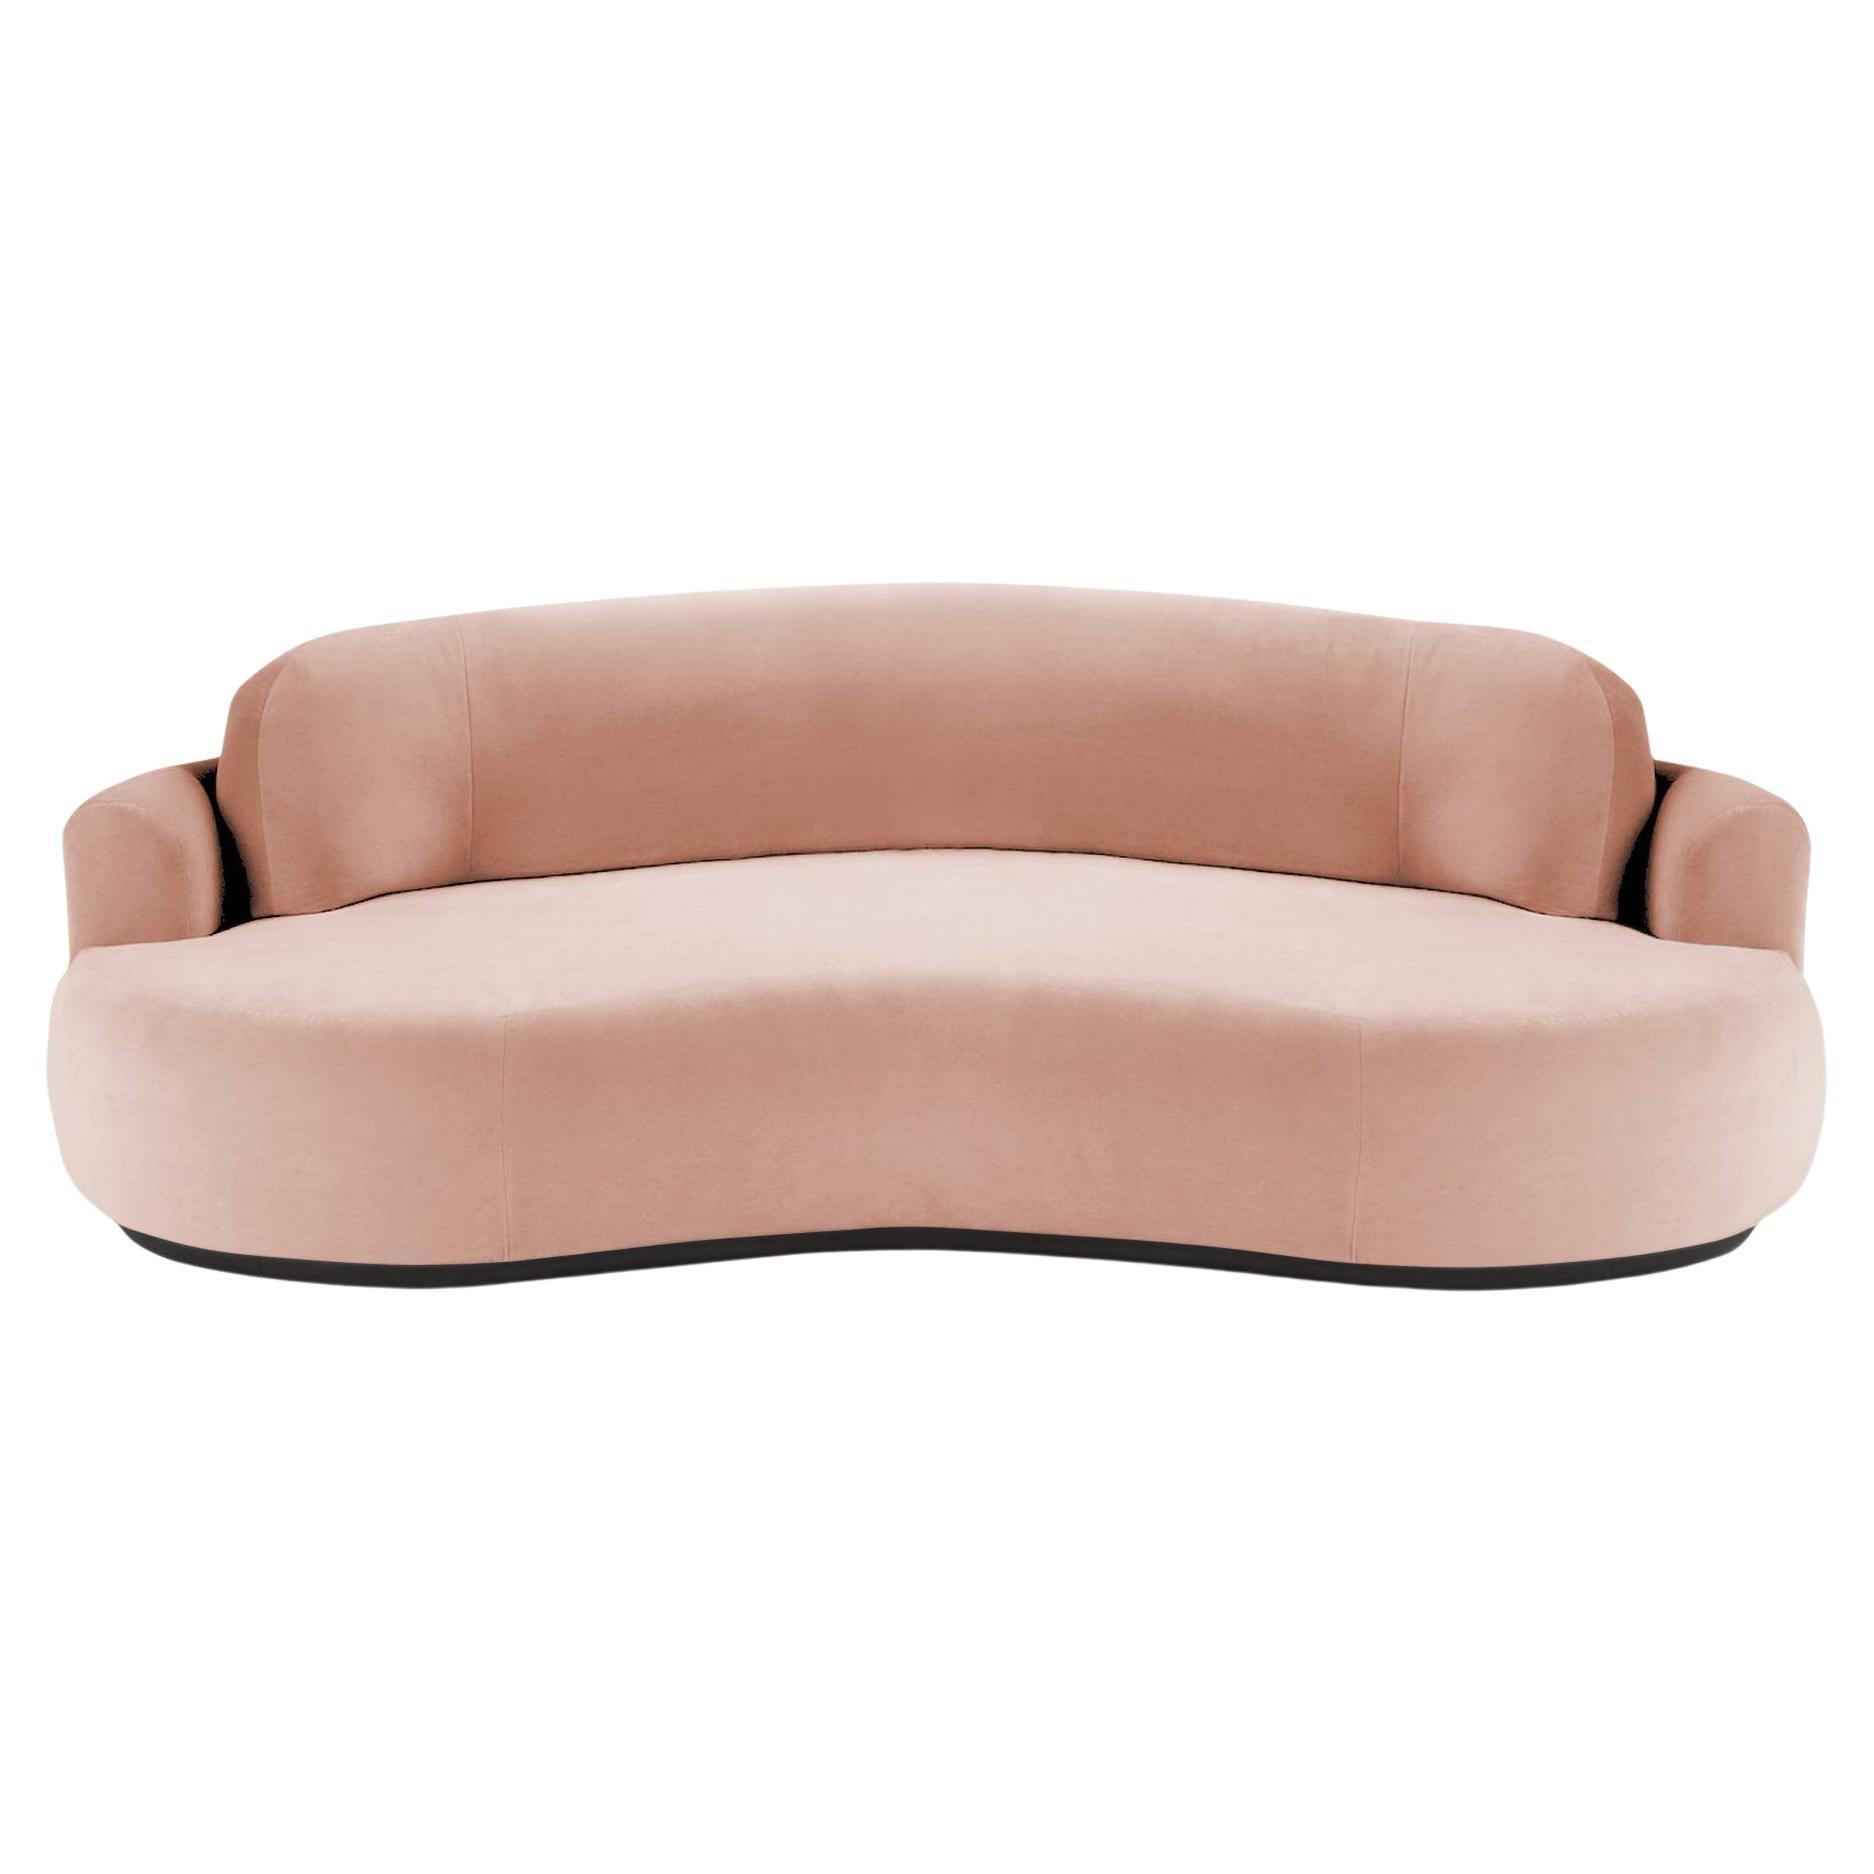 Naked Curved Sofa, Large with Beech Ash-056-5 and Vigo Blossom